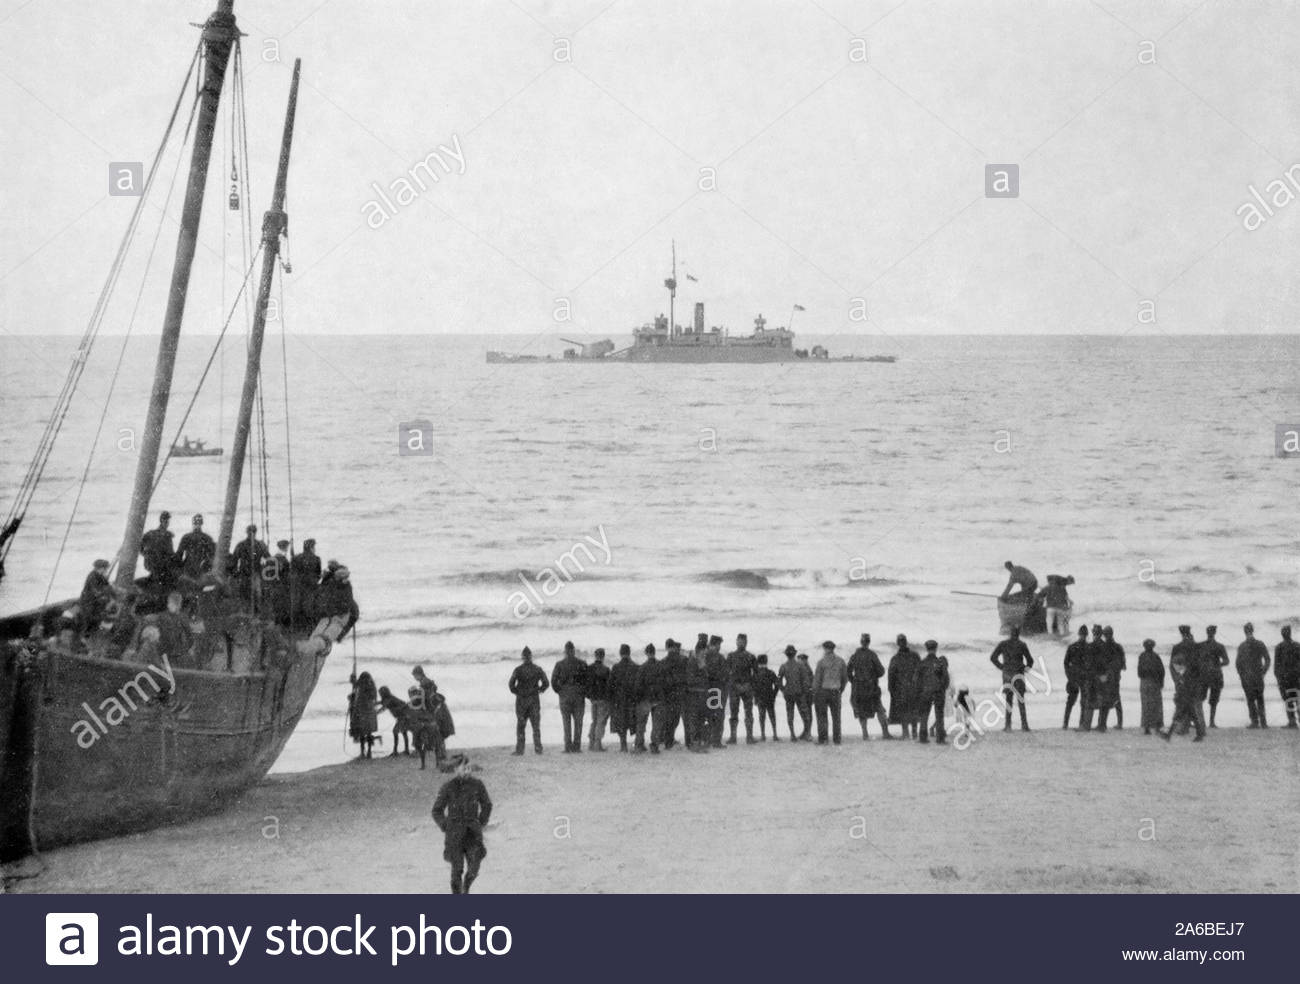 WW1 British Monitor ship, vintage photograph from 1914 Stock Photo